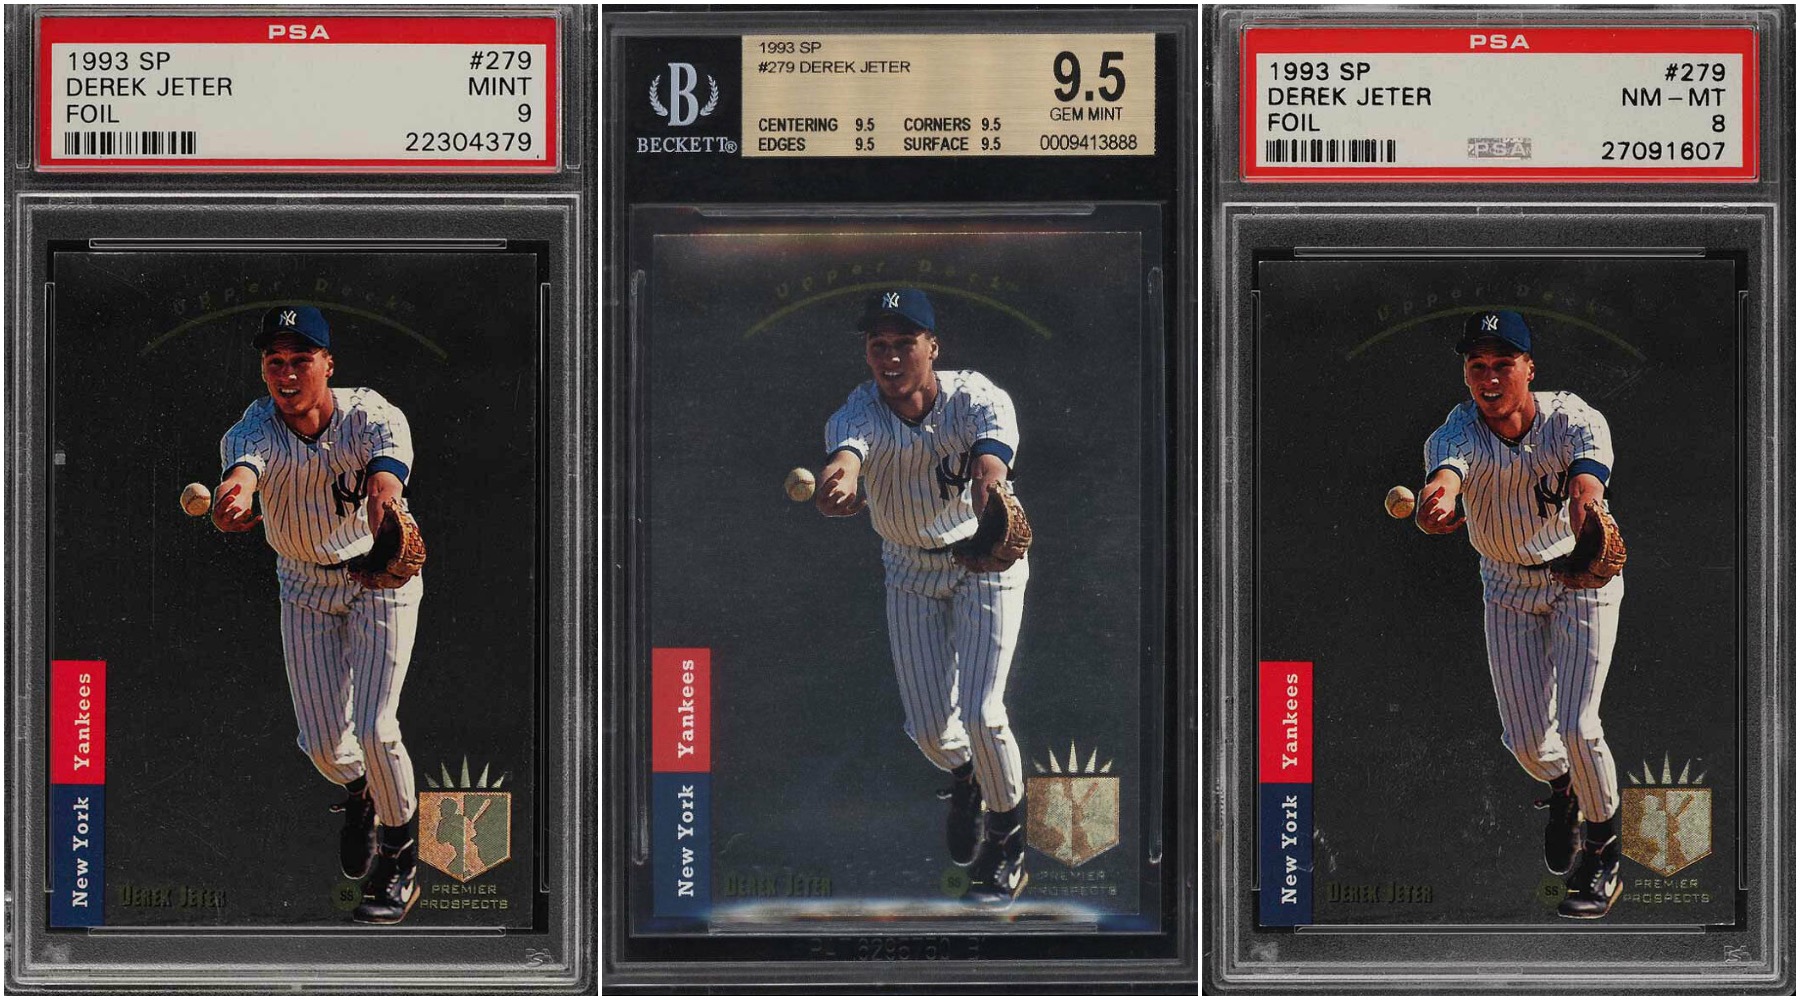 Three images of Derek Jeter sports trading cards